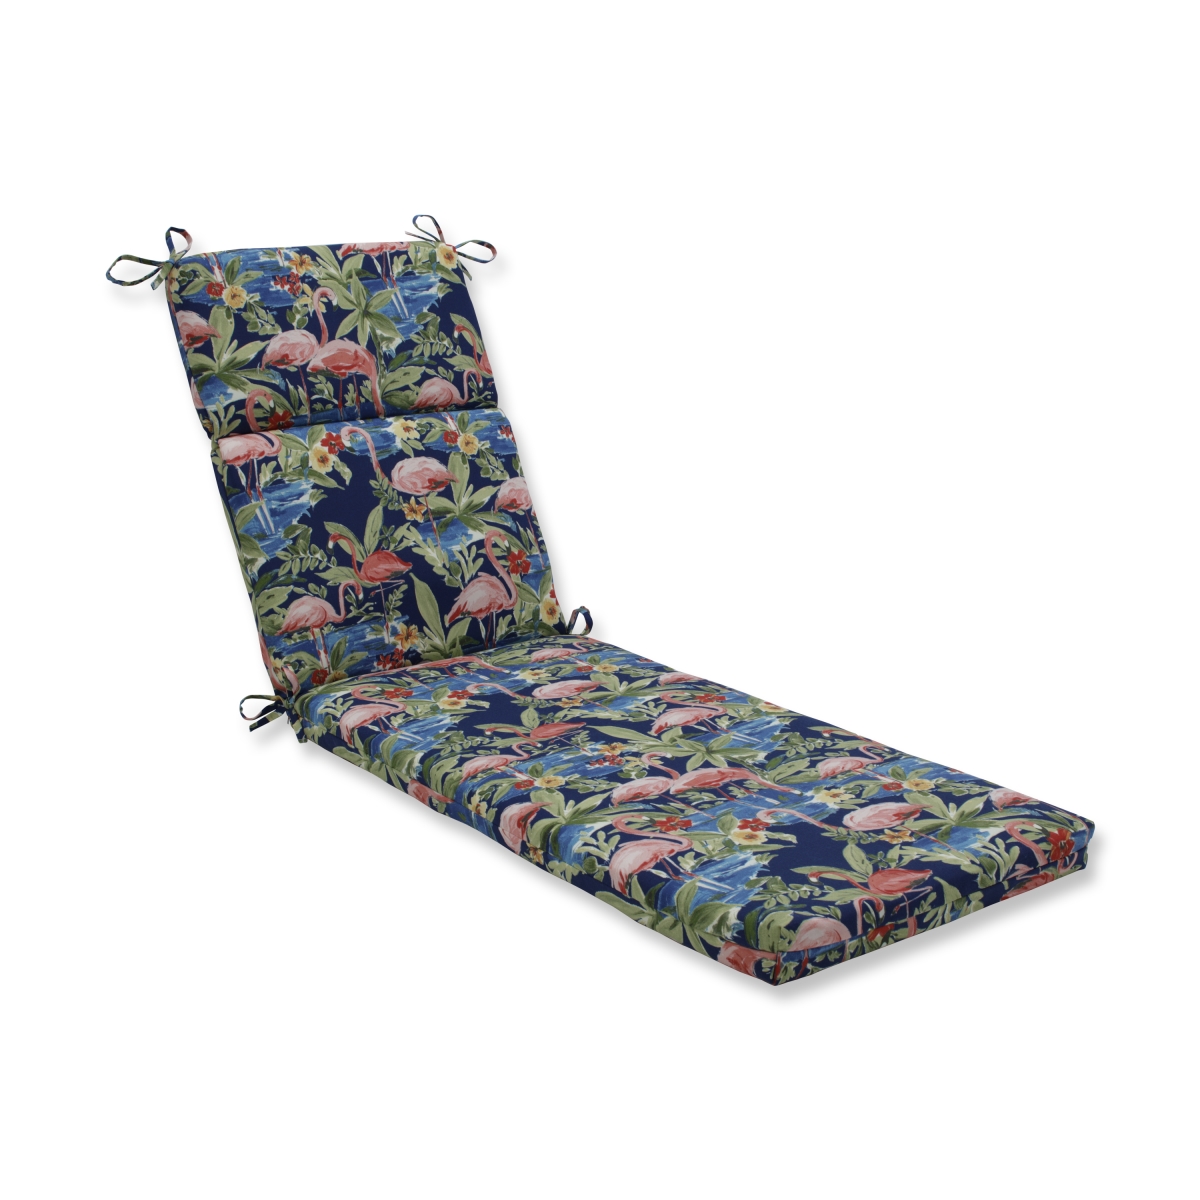 Outdoor & Indoor Flamingoing Lagoon Chaise Lounge Cushion, Blue